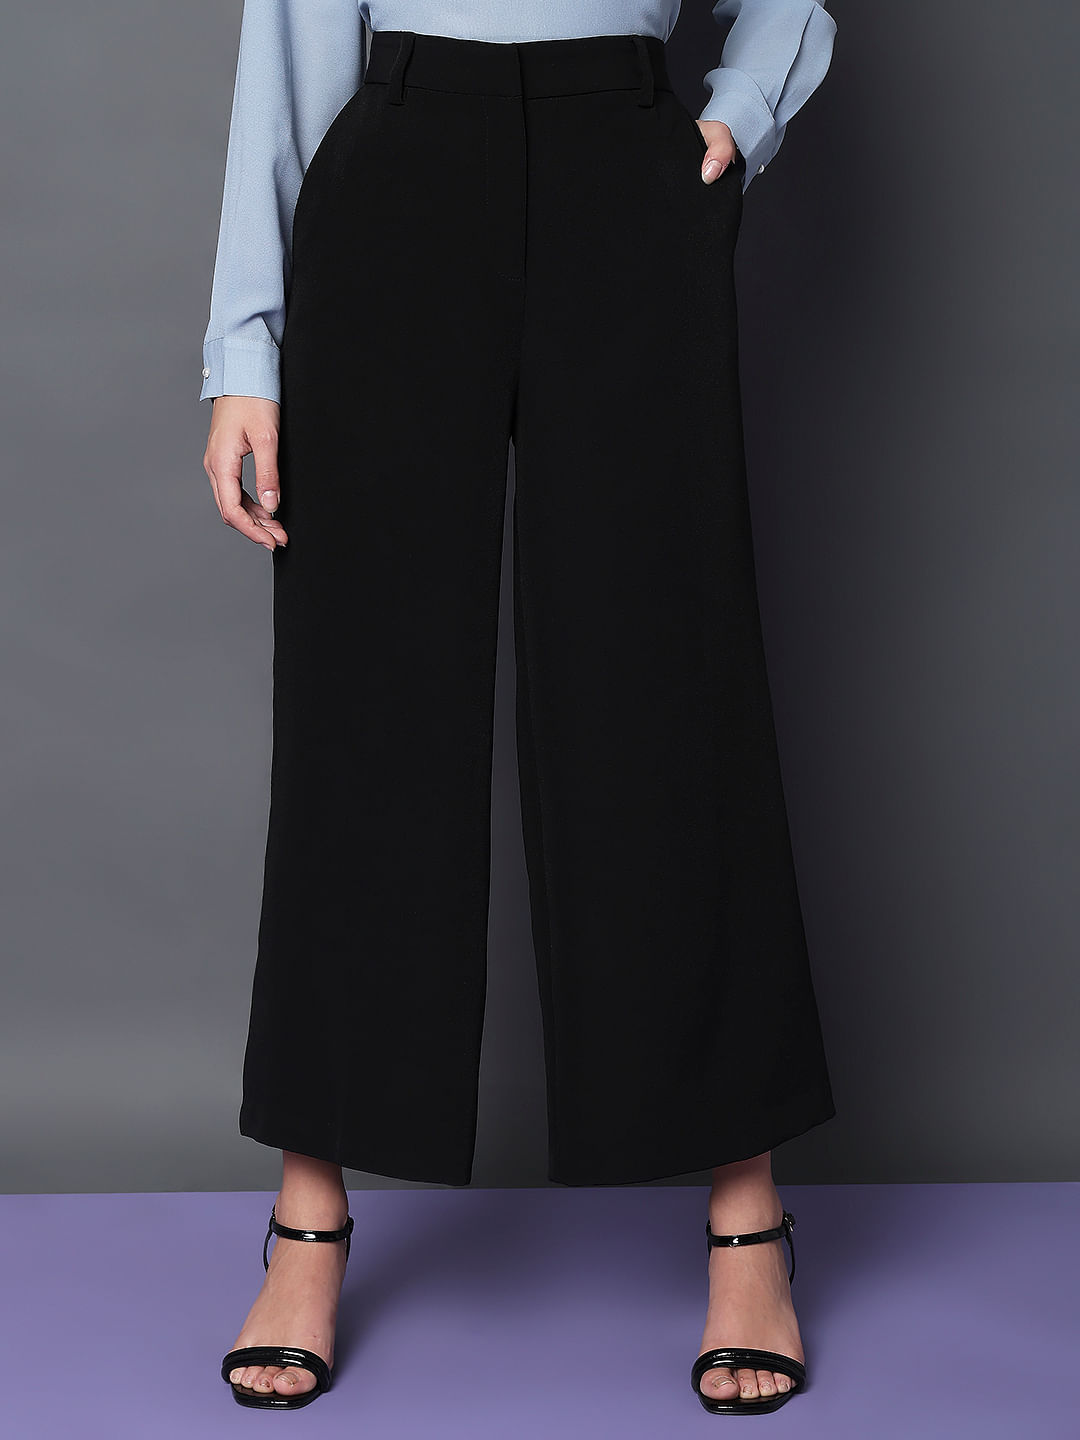 Black Wide Leg Pants for Work & Play | Luci's Morsels